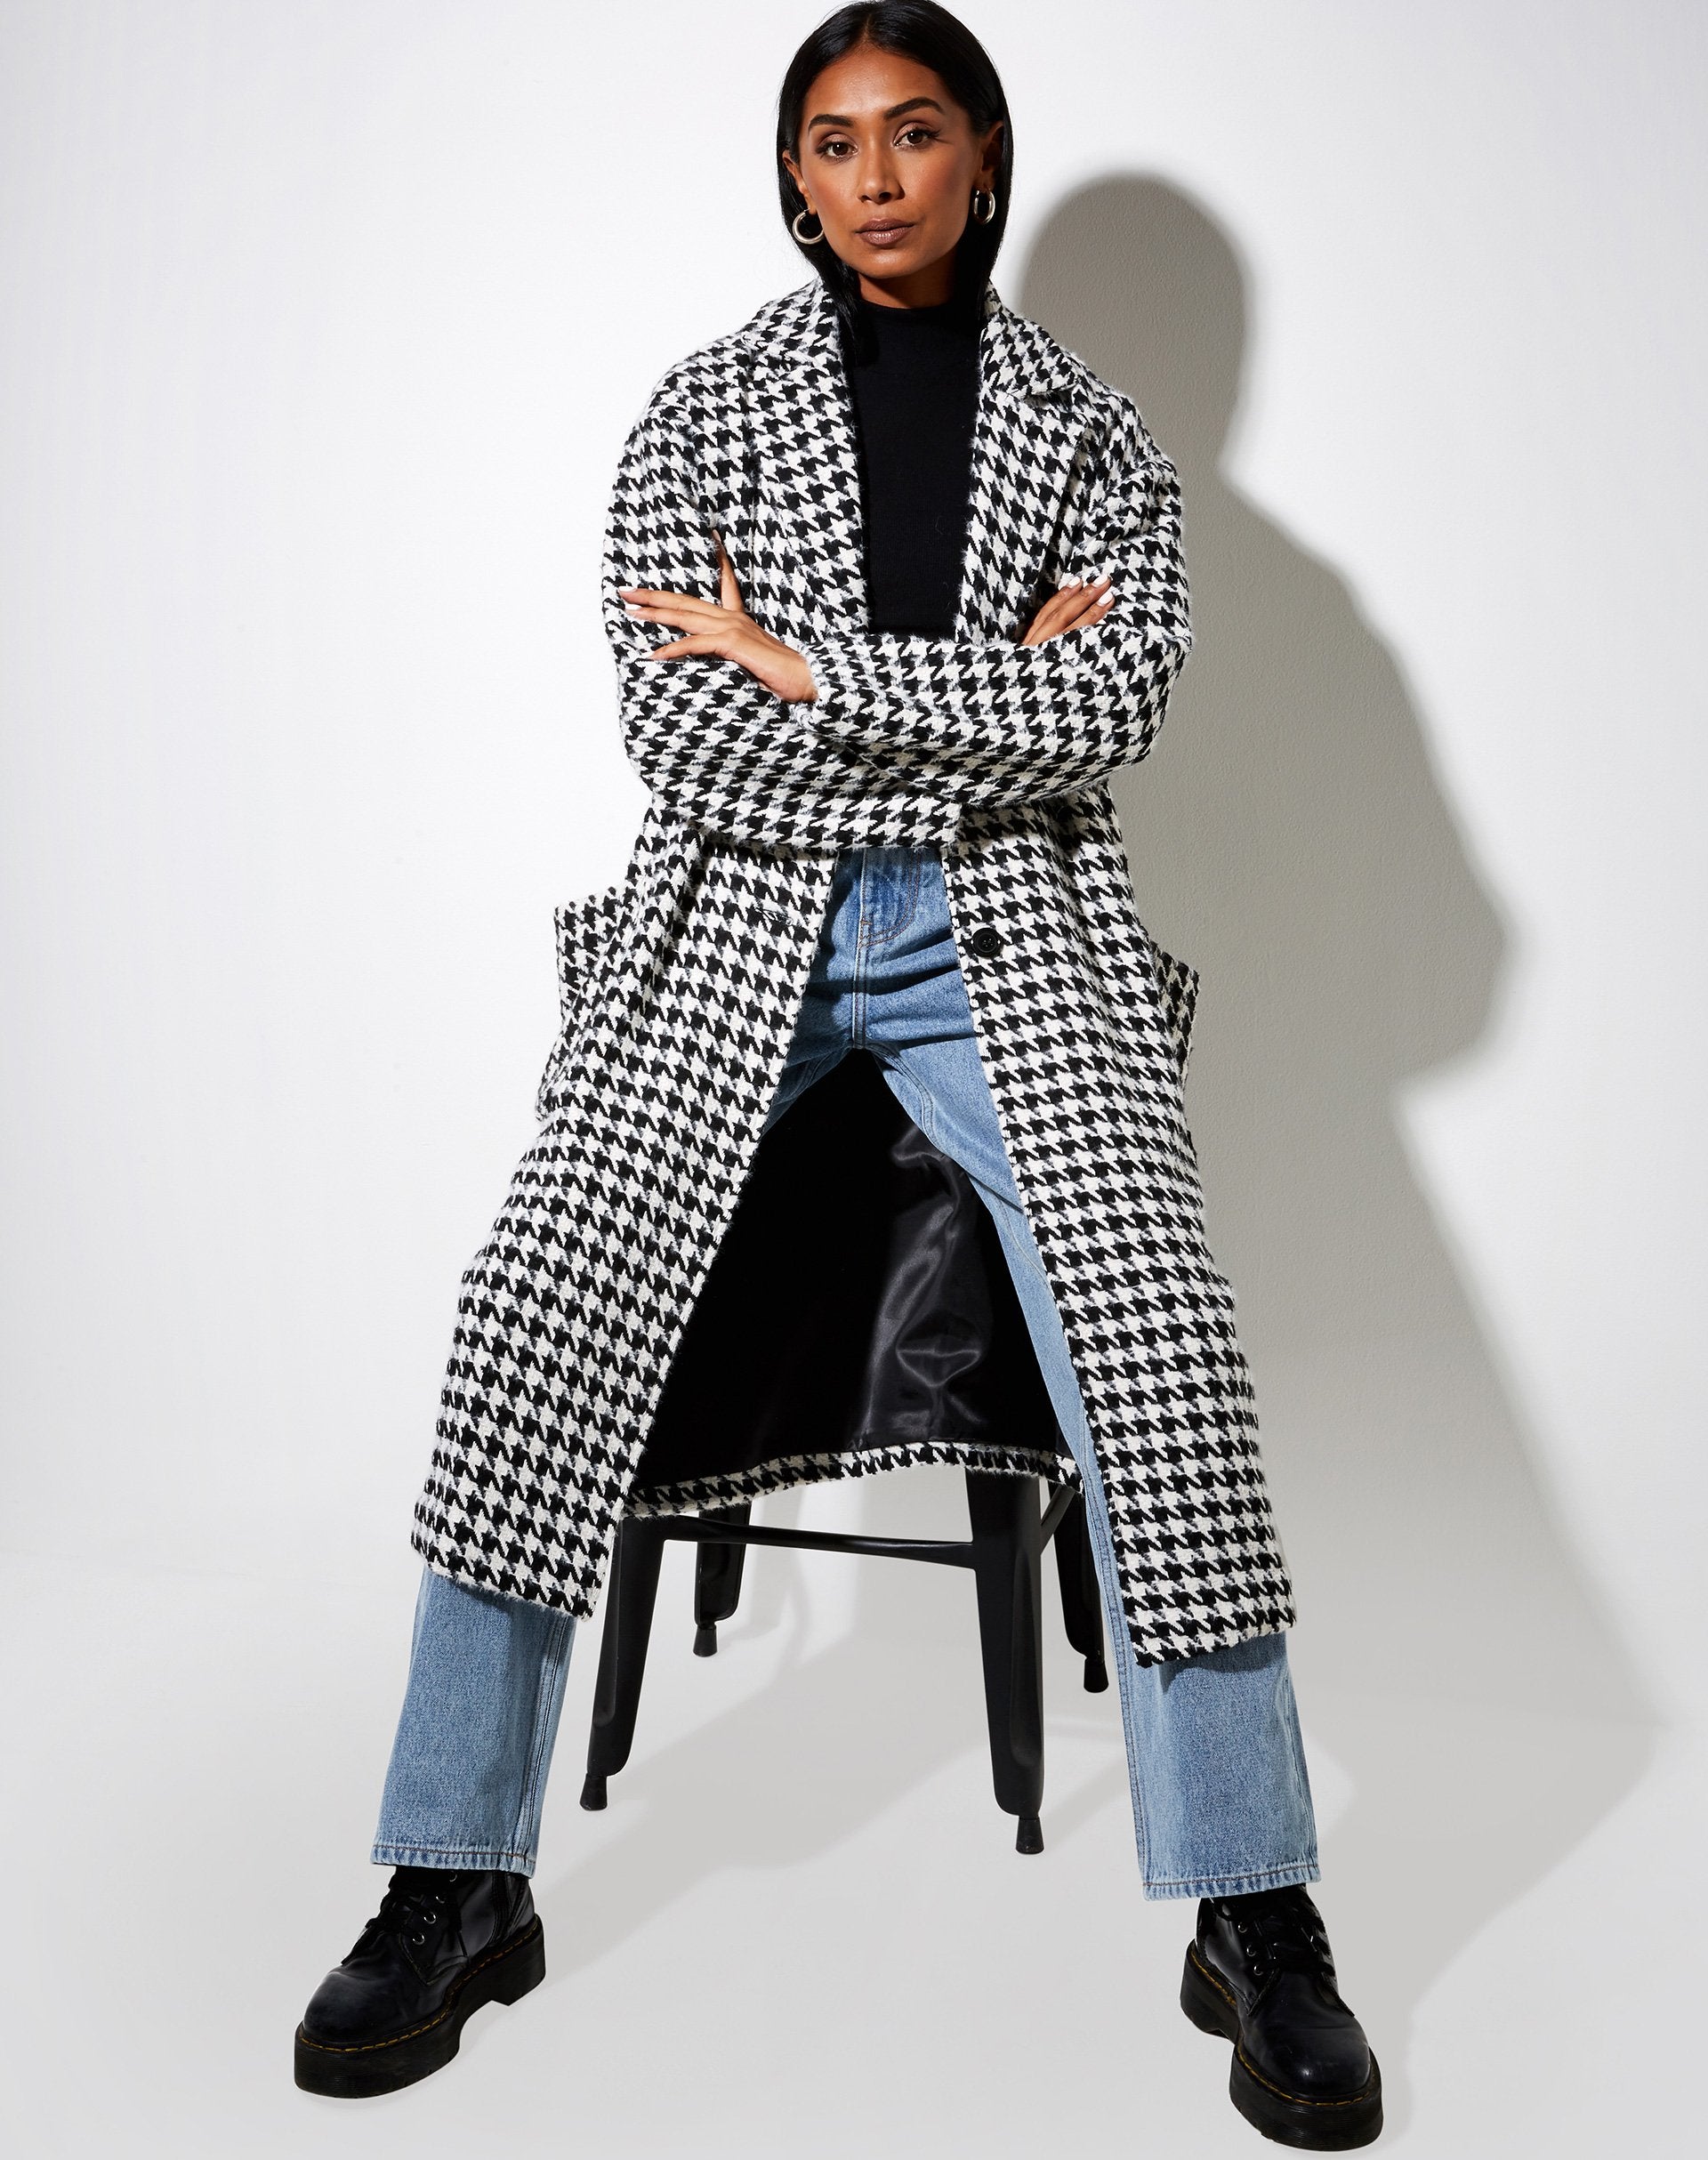 Image of Duster Coat in Houndstooth Black and White